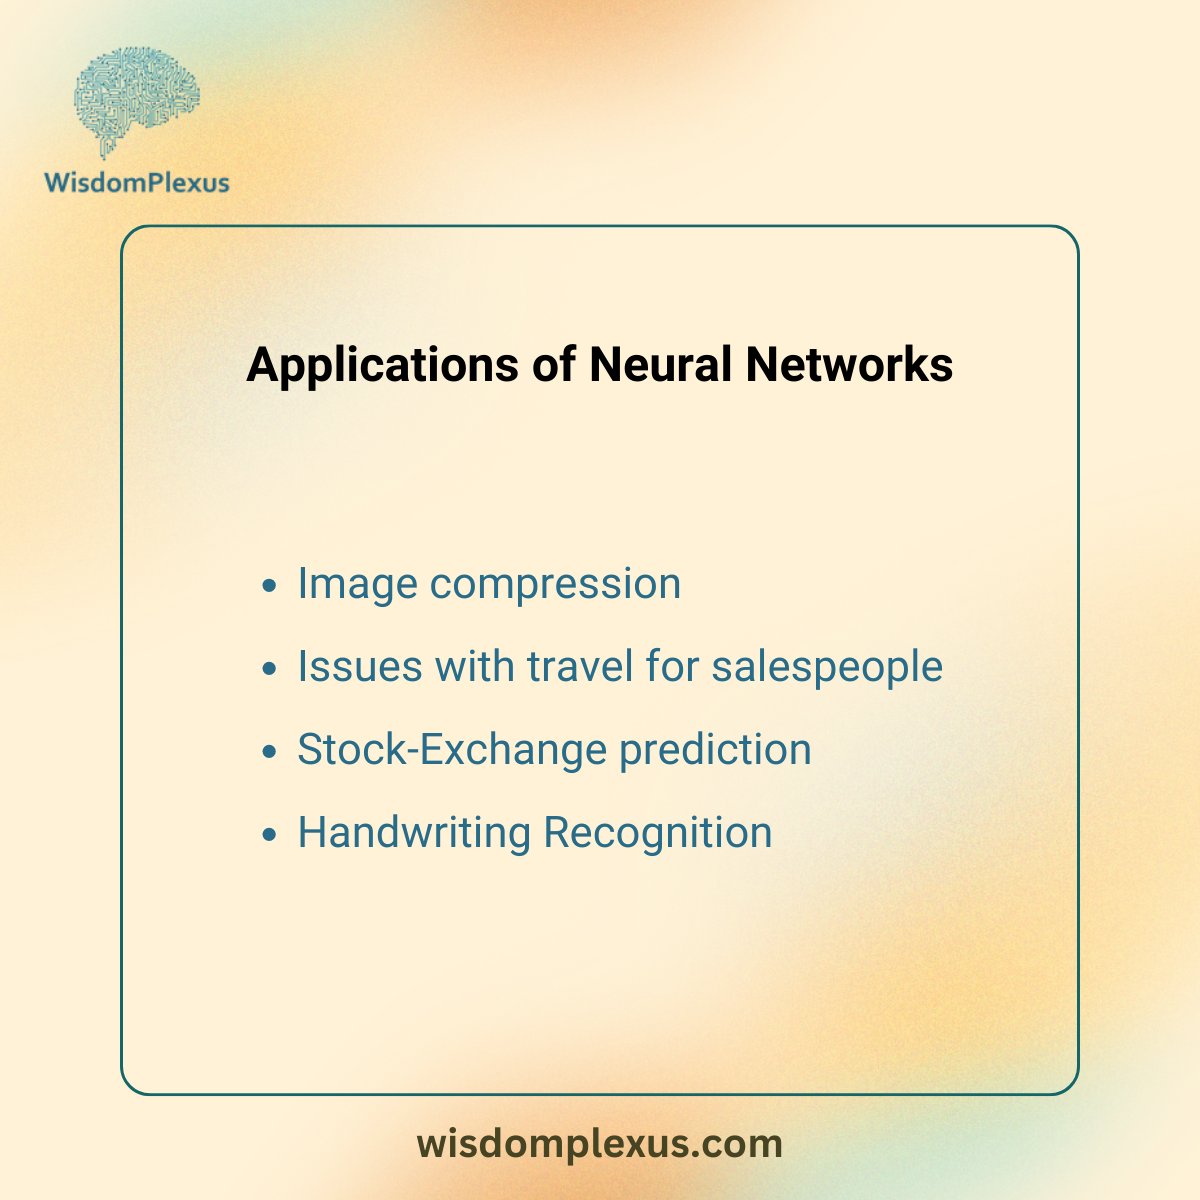 Different Applications of Neural Networks and Their Types

Read More: shorturl.at/ADQR4

#machinelearning #artificialneuralnetwork #informationtechnology #deeplearning #technology #ai #ml